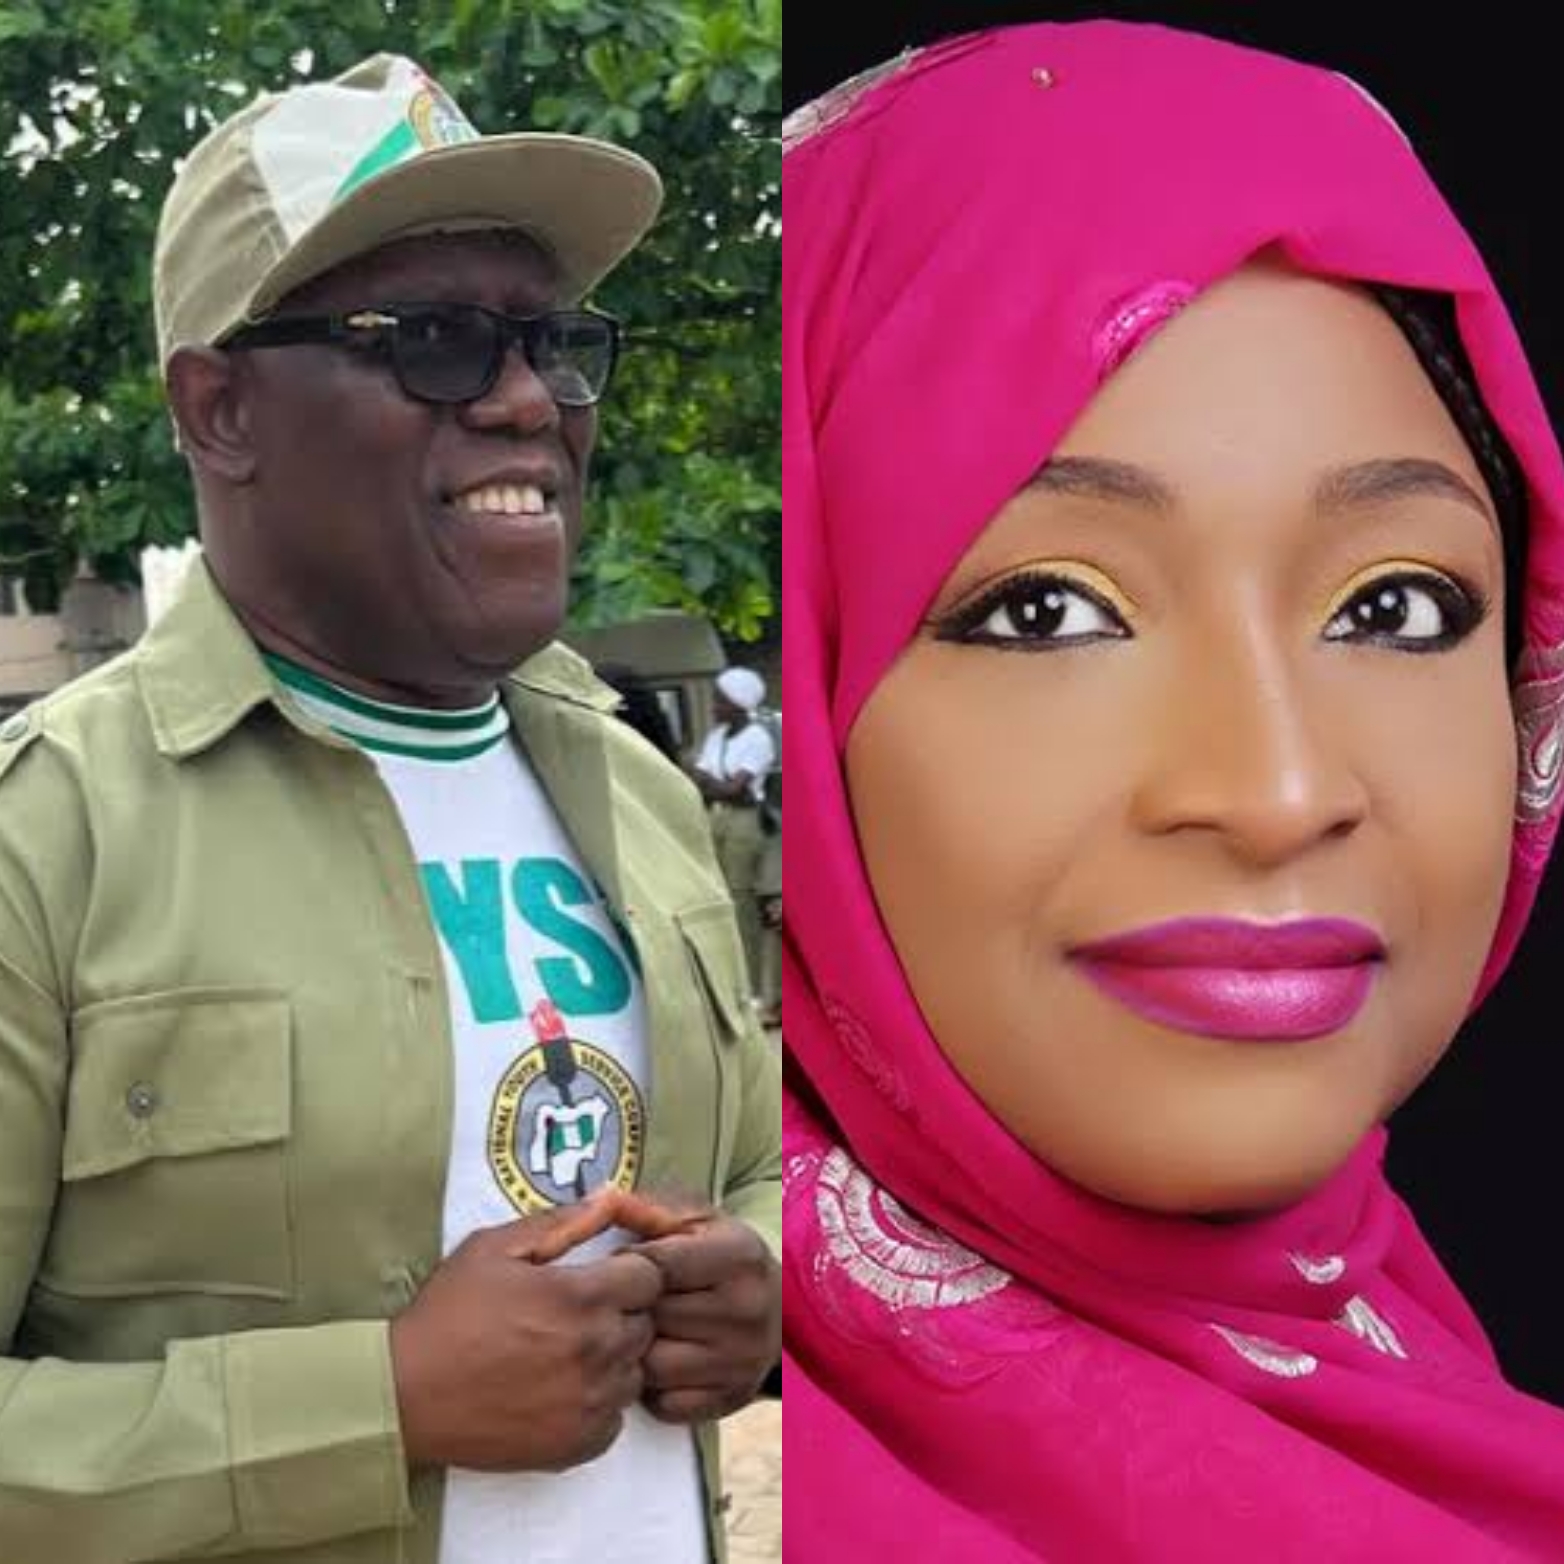 NBA sues Culture Minister Musawa and Kenny Ogungbe over alleged violation of NYSC Act